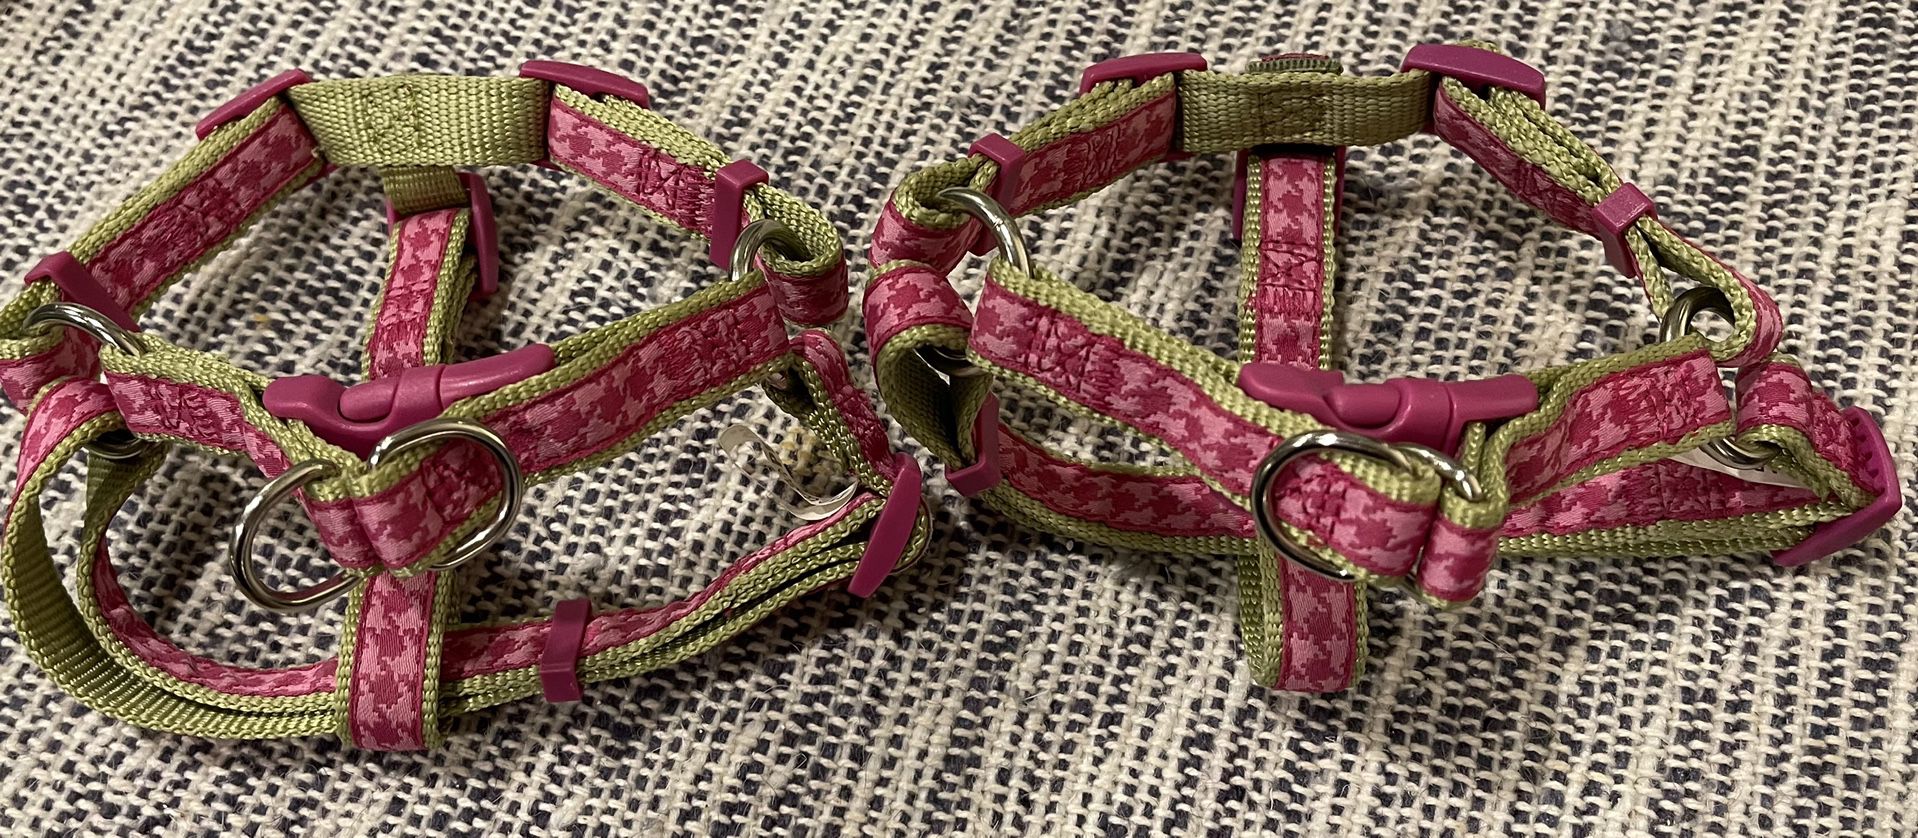 Like new Martha Stewart Dog Harness’.  Small and Xsmall.   $2 ea or $3 for pr